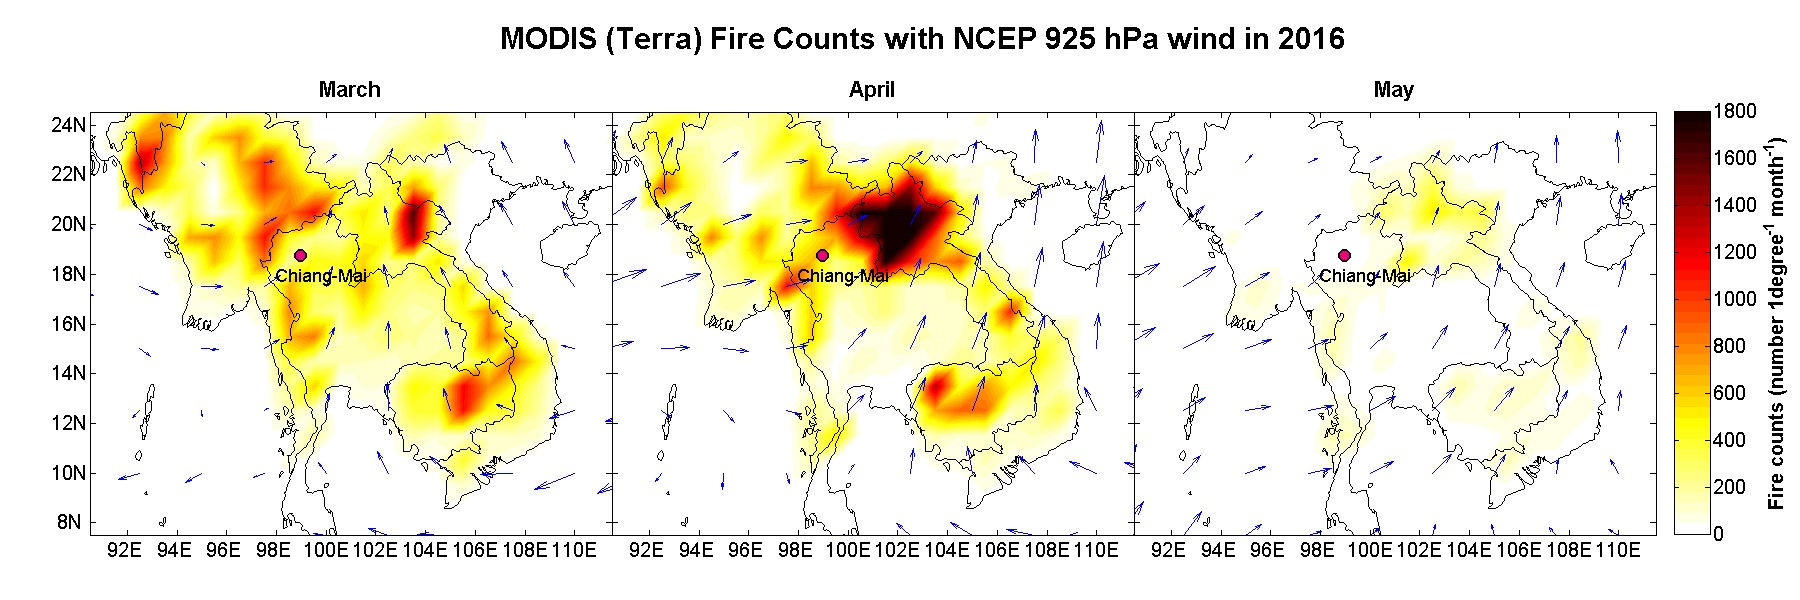 Figure 1. Monthly fire counts over northern PSEA region. The red circle shows the location of Chiang Mai. NCEP reanalysis 925 hPa winds (vector) are also shown.